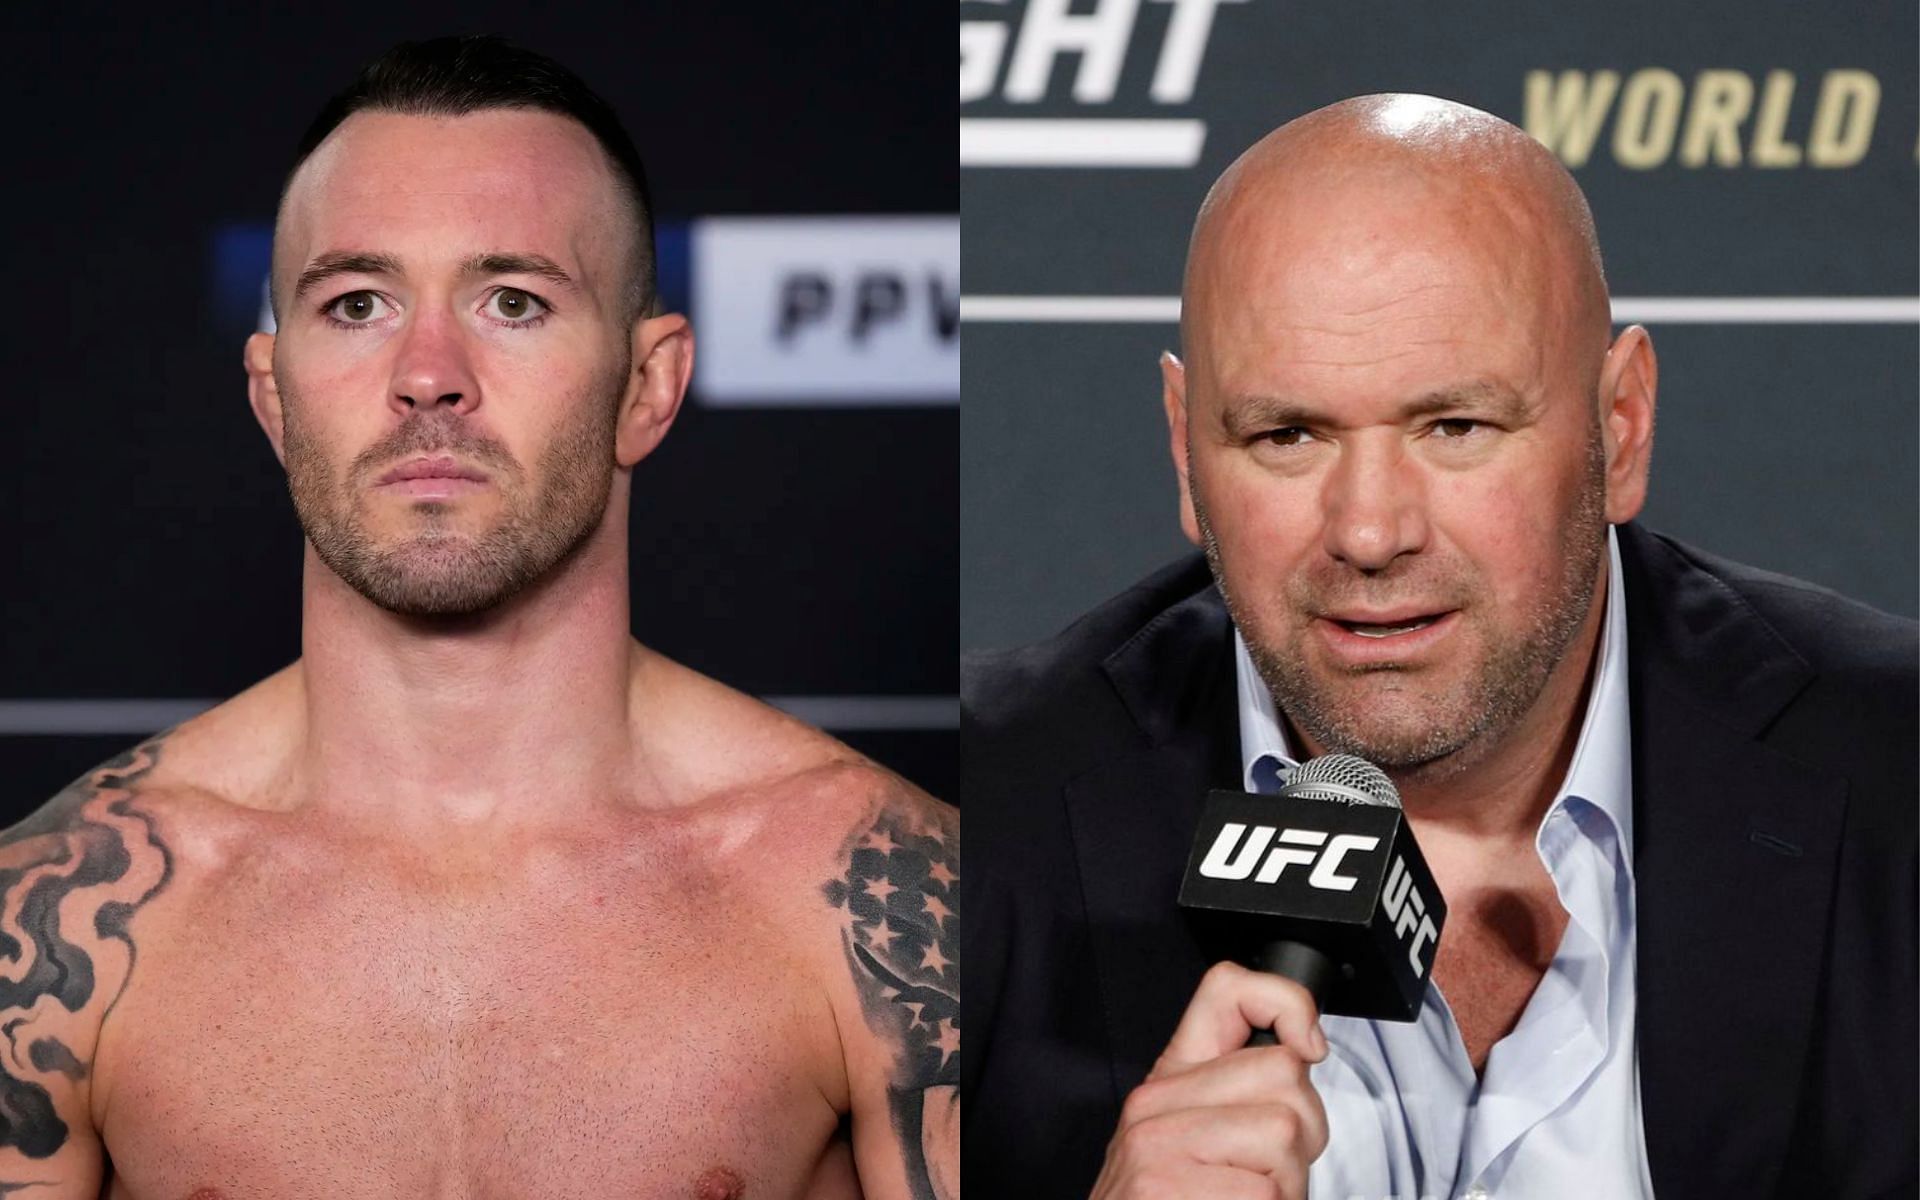 Colby Covington (left) and Dana White (right). [via Getty Images and MMA Fighting]